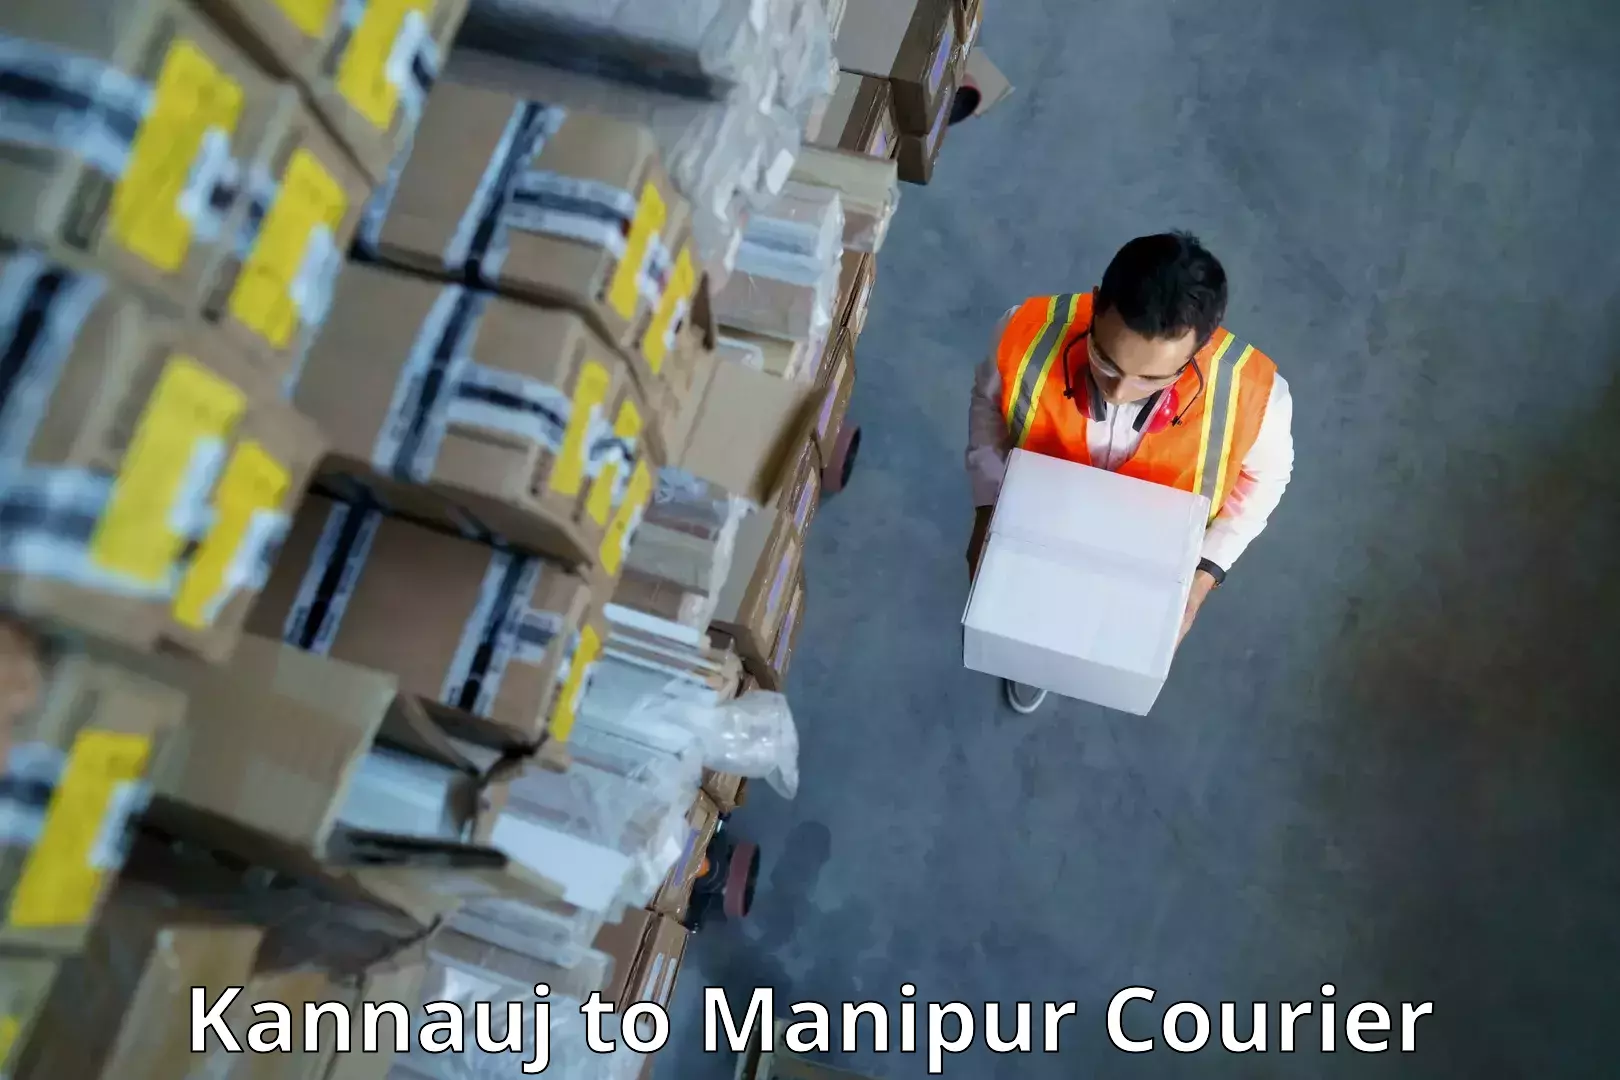 Cash on delivery service Kannauj to Manipur